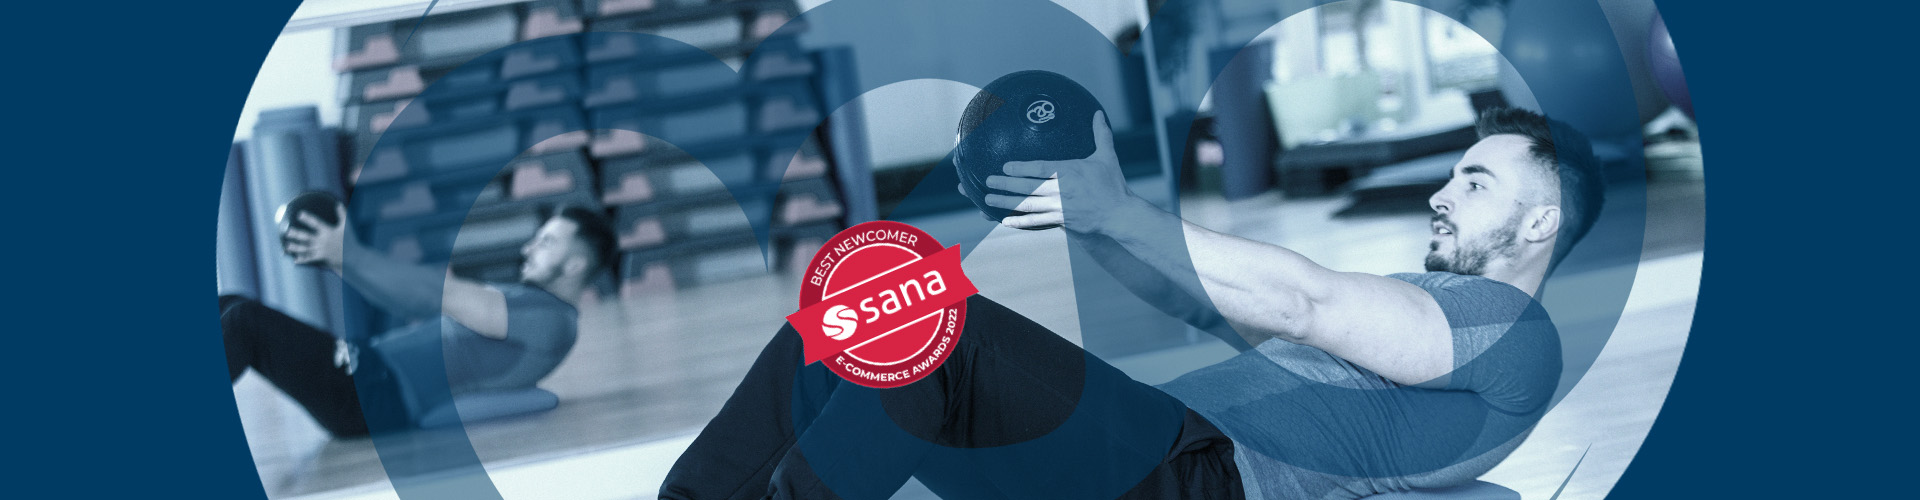 A Badge saying 'Best Newcomer Sana E-Commerce Awards 2022' Over a man exercising and the Mad logo